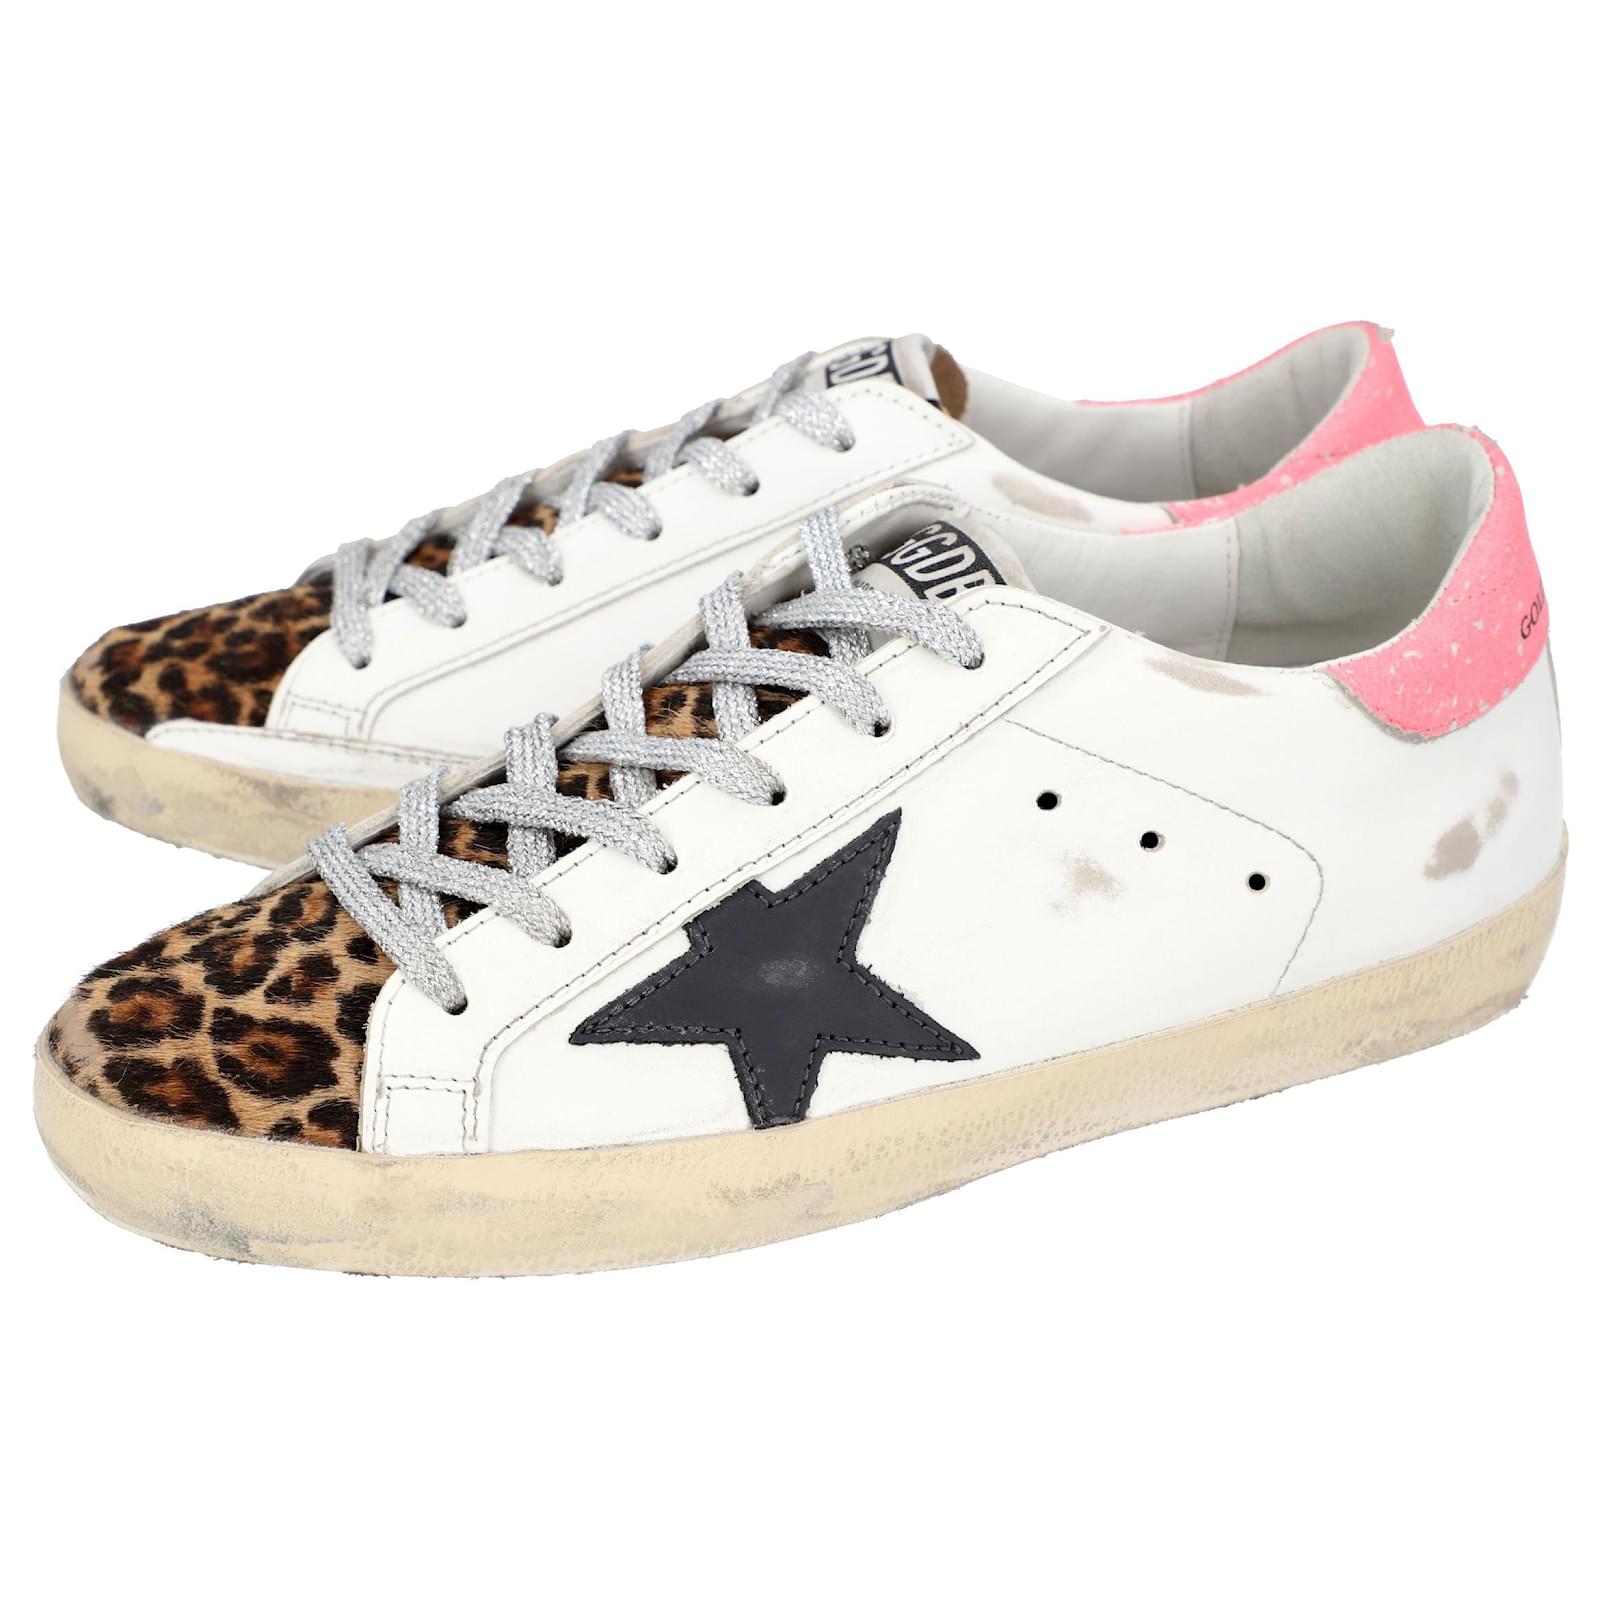 Golden Goose Superstar sneaker in white with beige Multiple colors ...